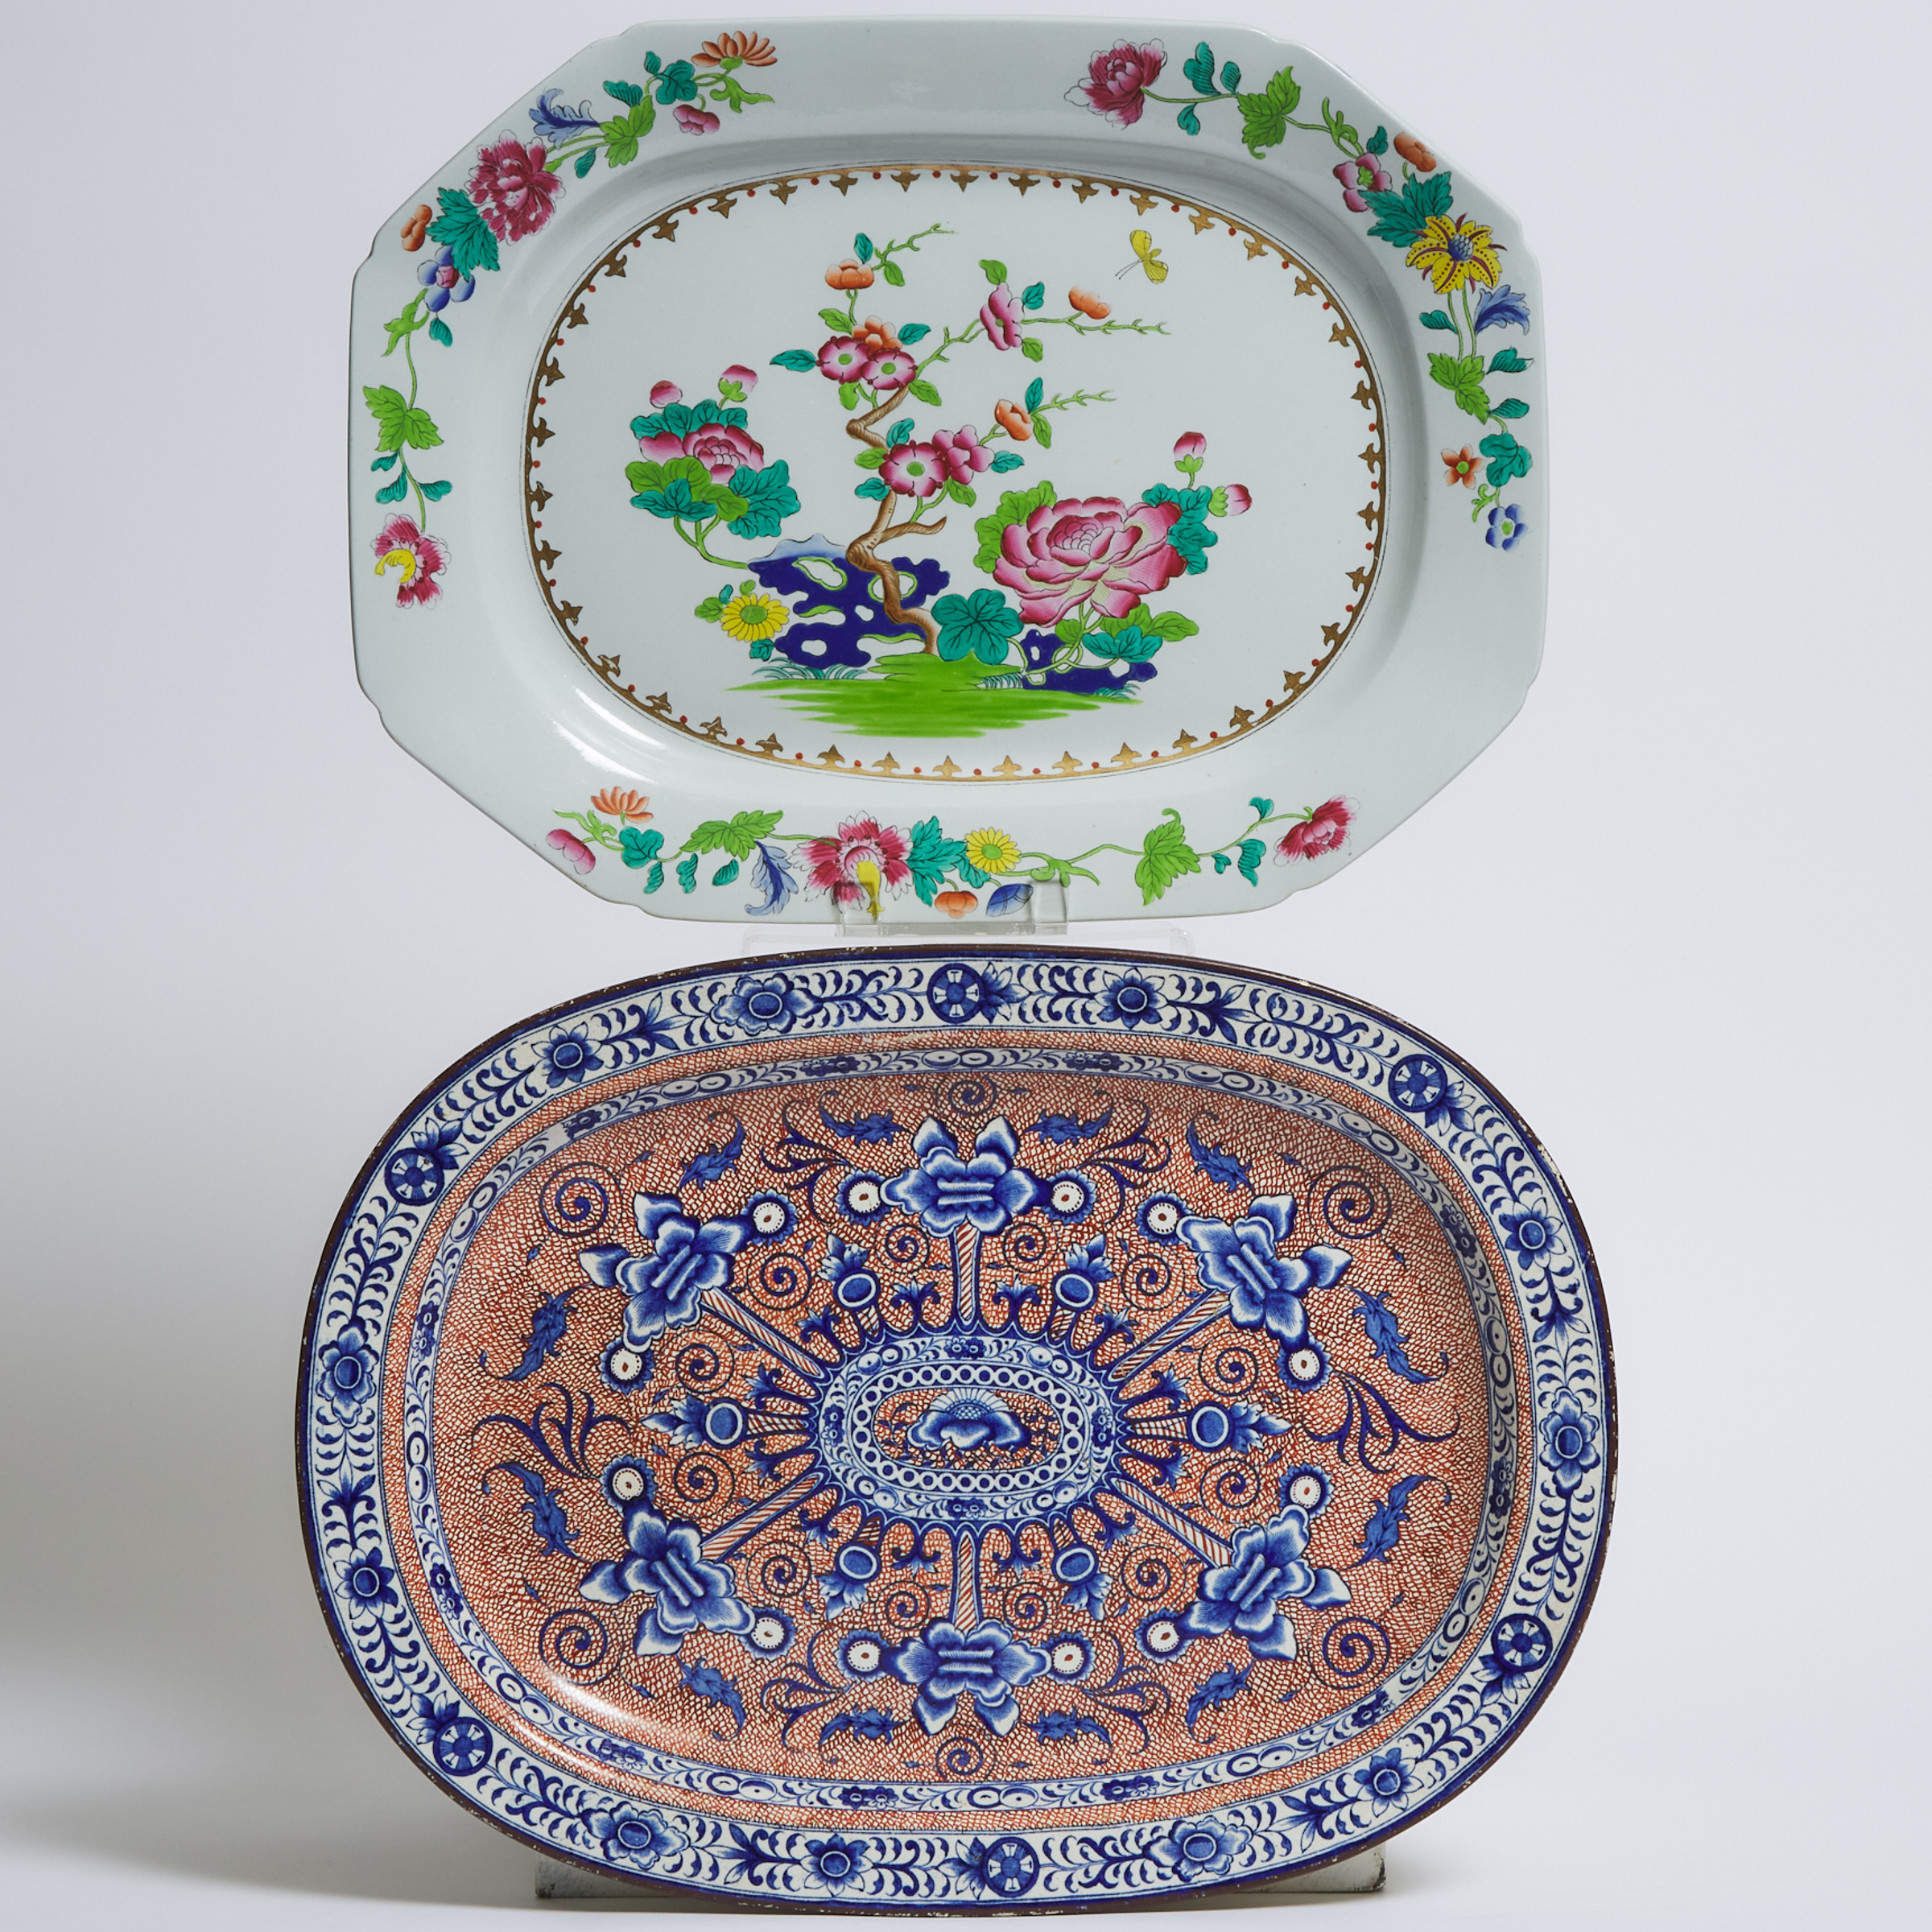 Spode Stone China Octagonal Platter and a Staffordshire Earthenware Oval Platter, first half of the 19th century